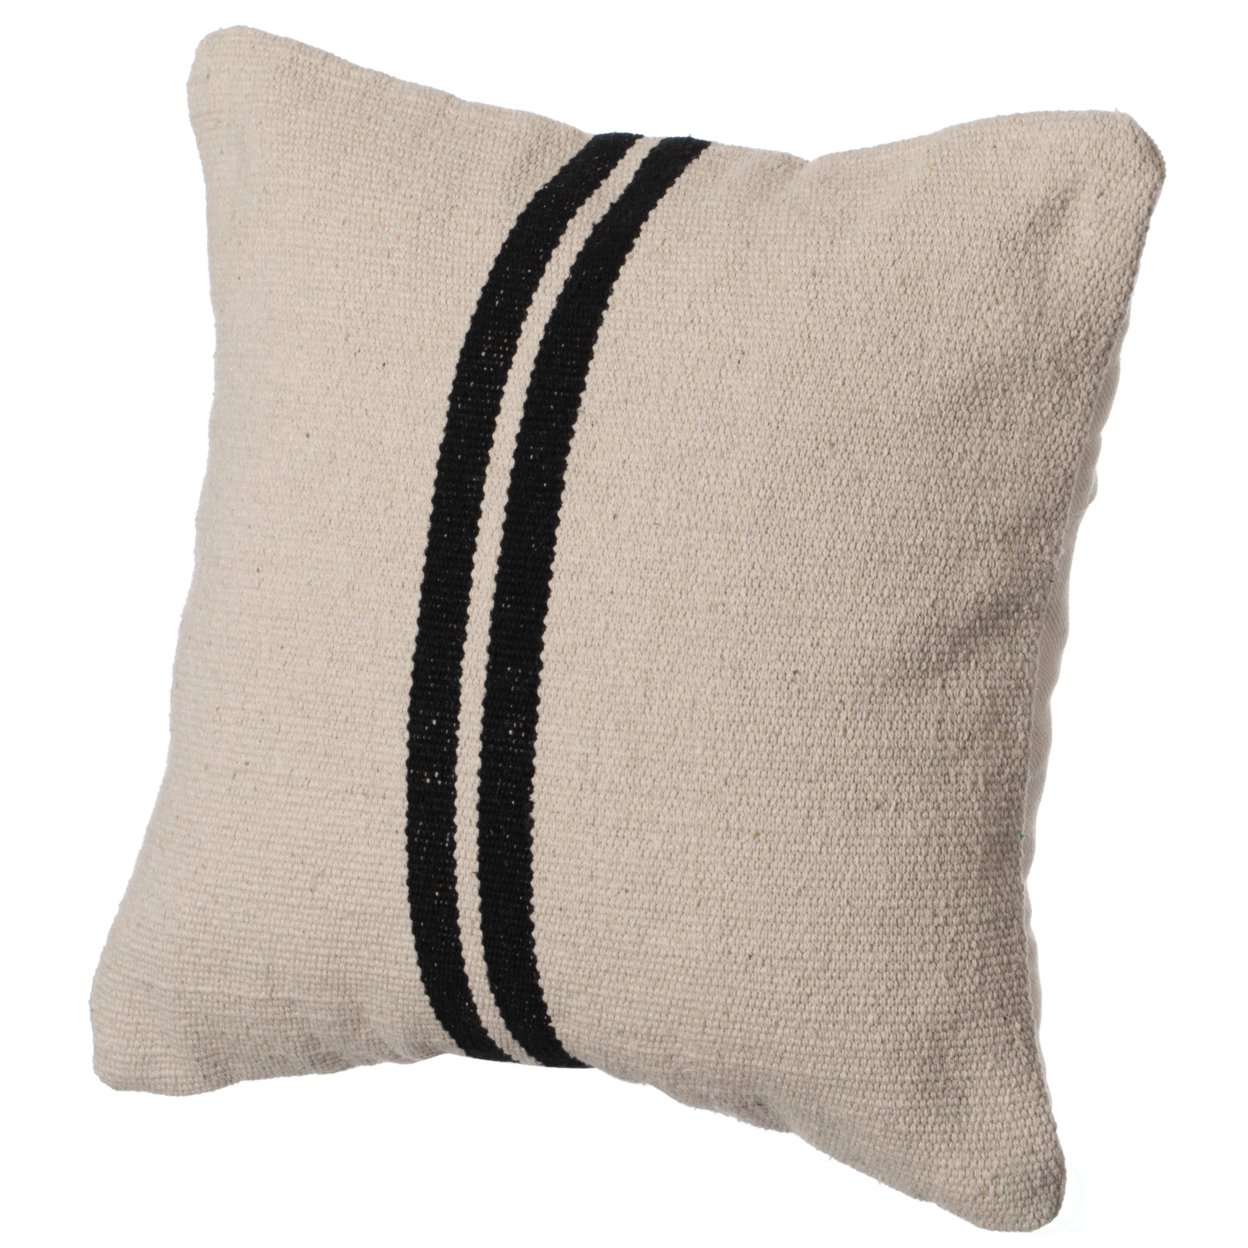 16 Handwoven Cotton Throw Pillow Cover Flat Natural Design - Seams With Cushion